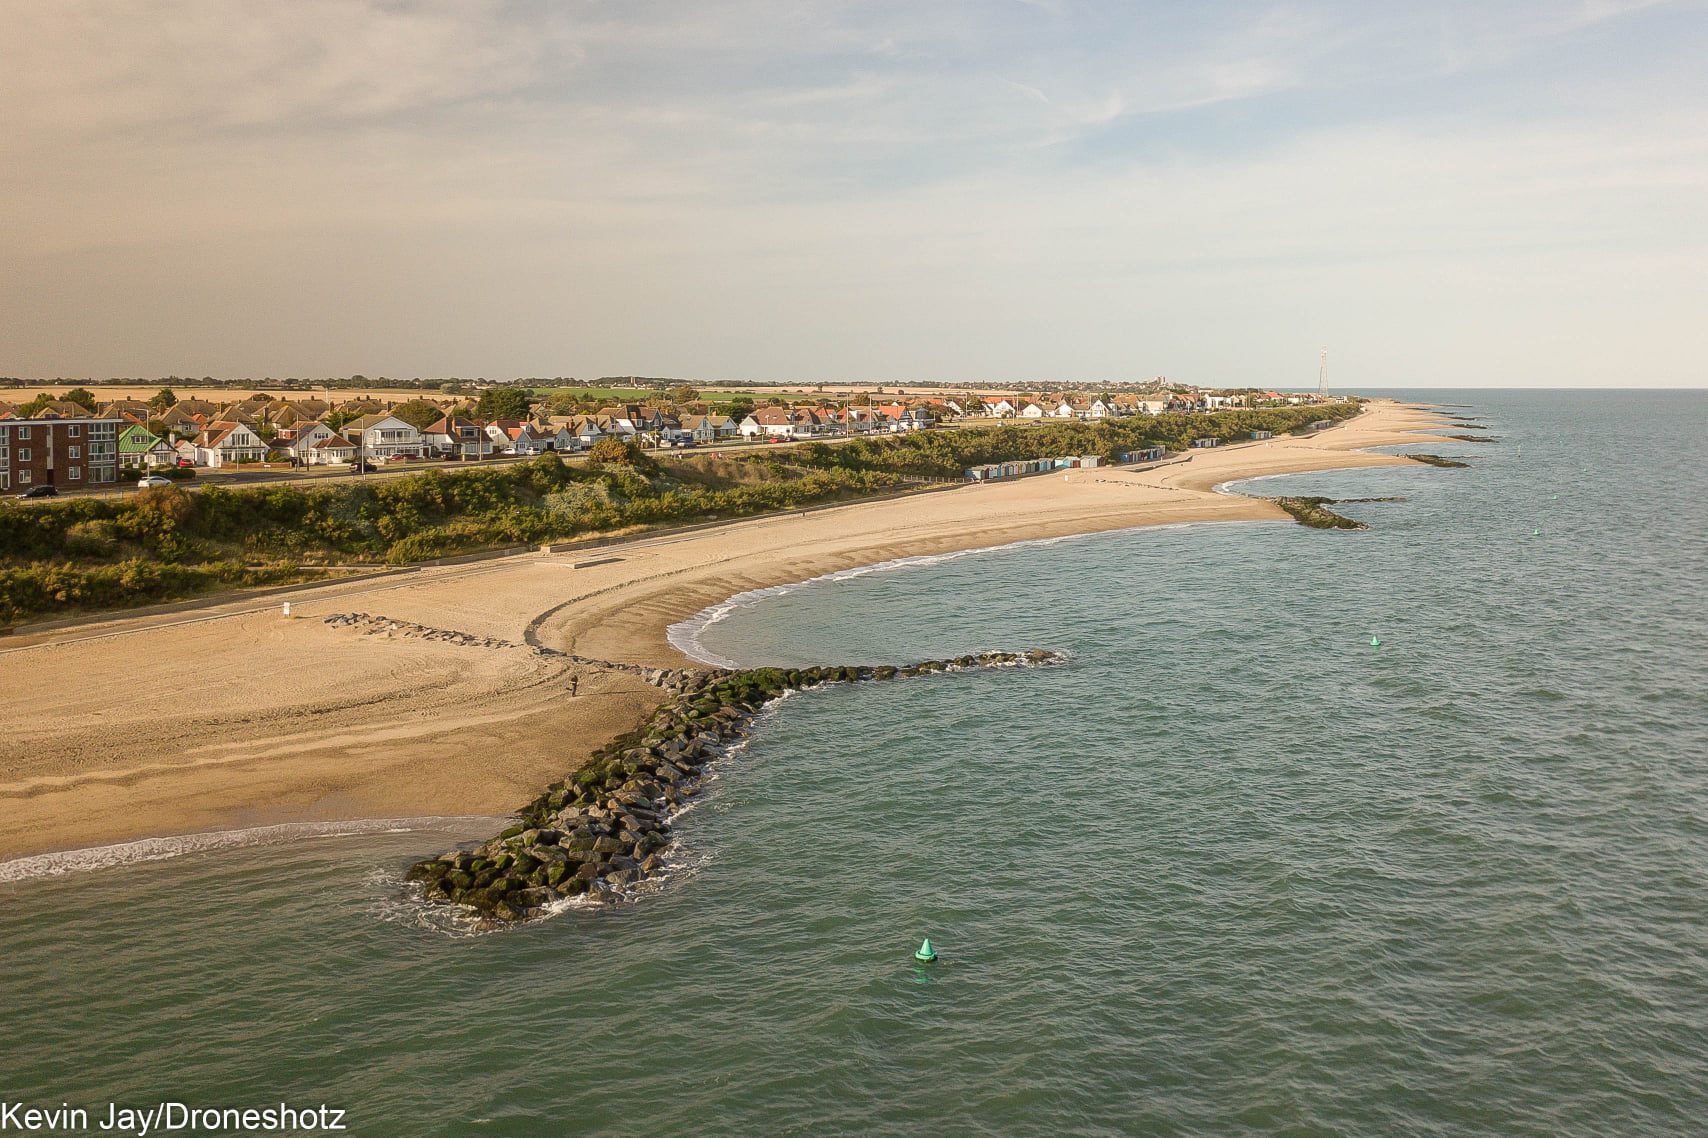 Arial View of Coastline - Holland on Sea